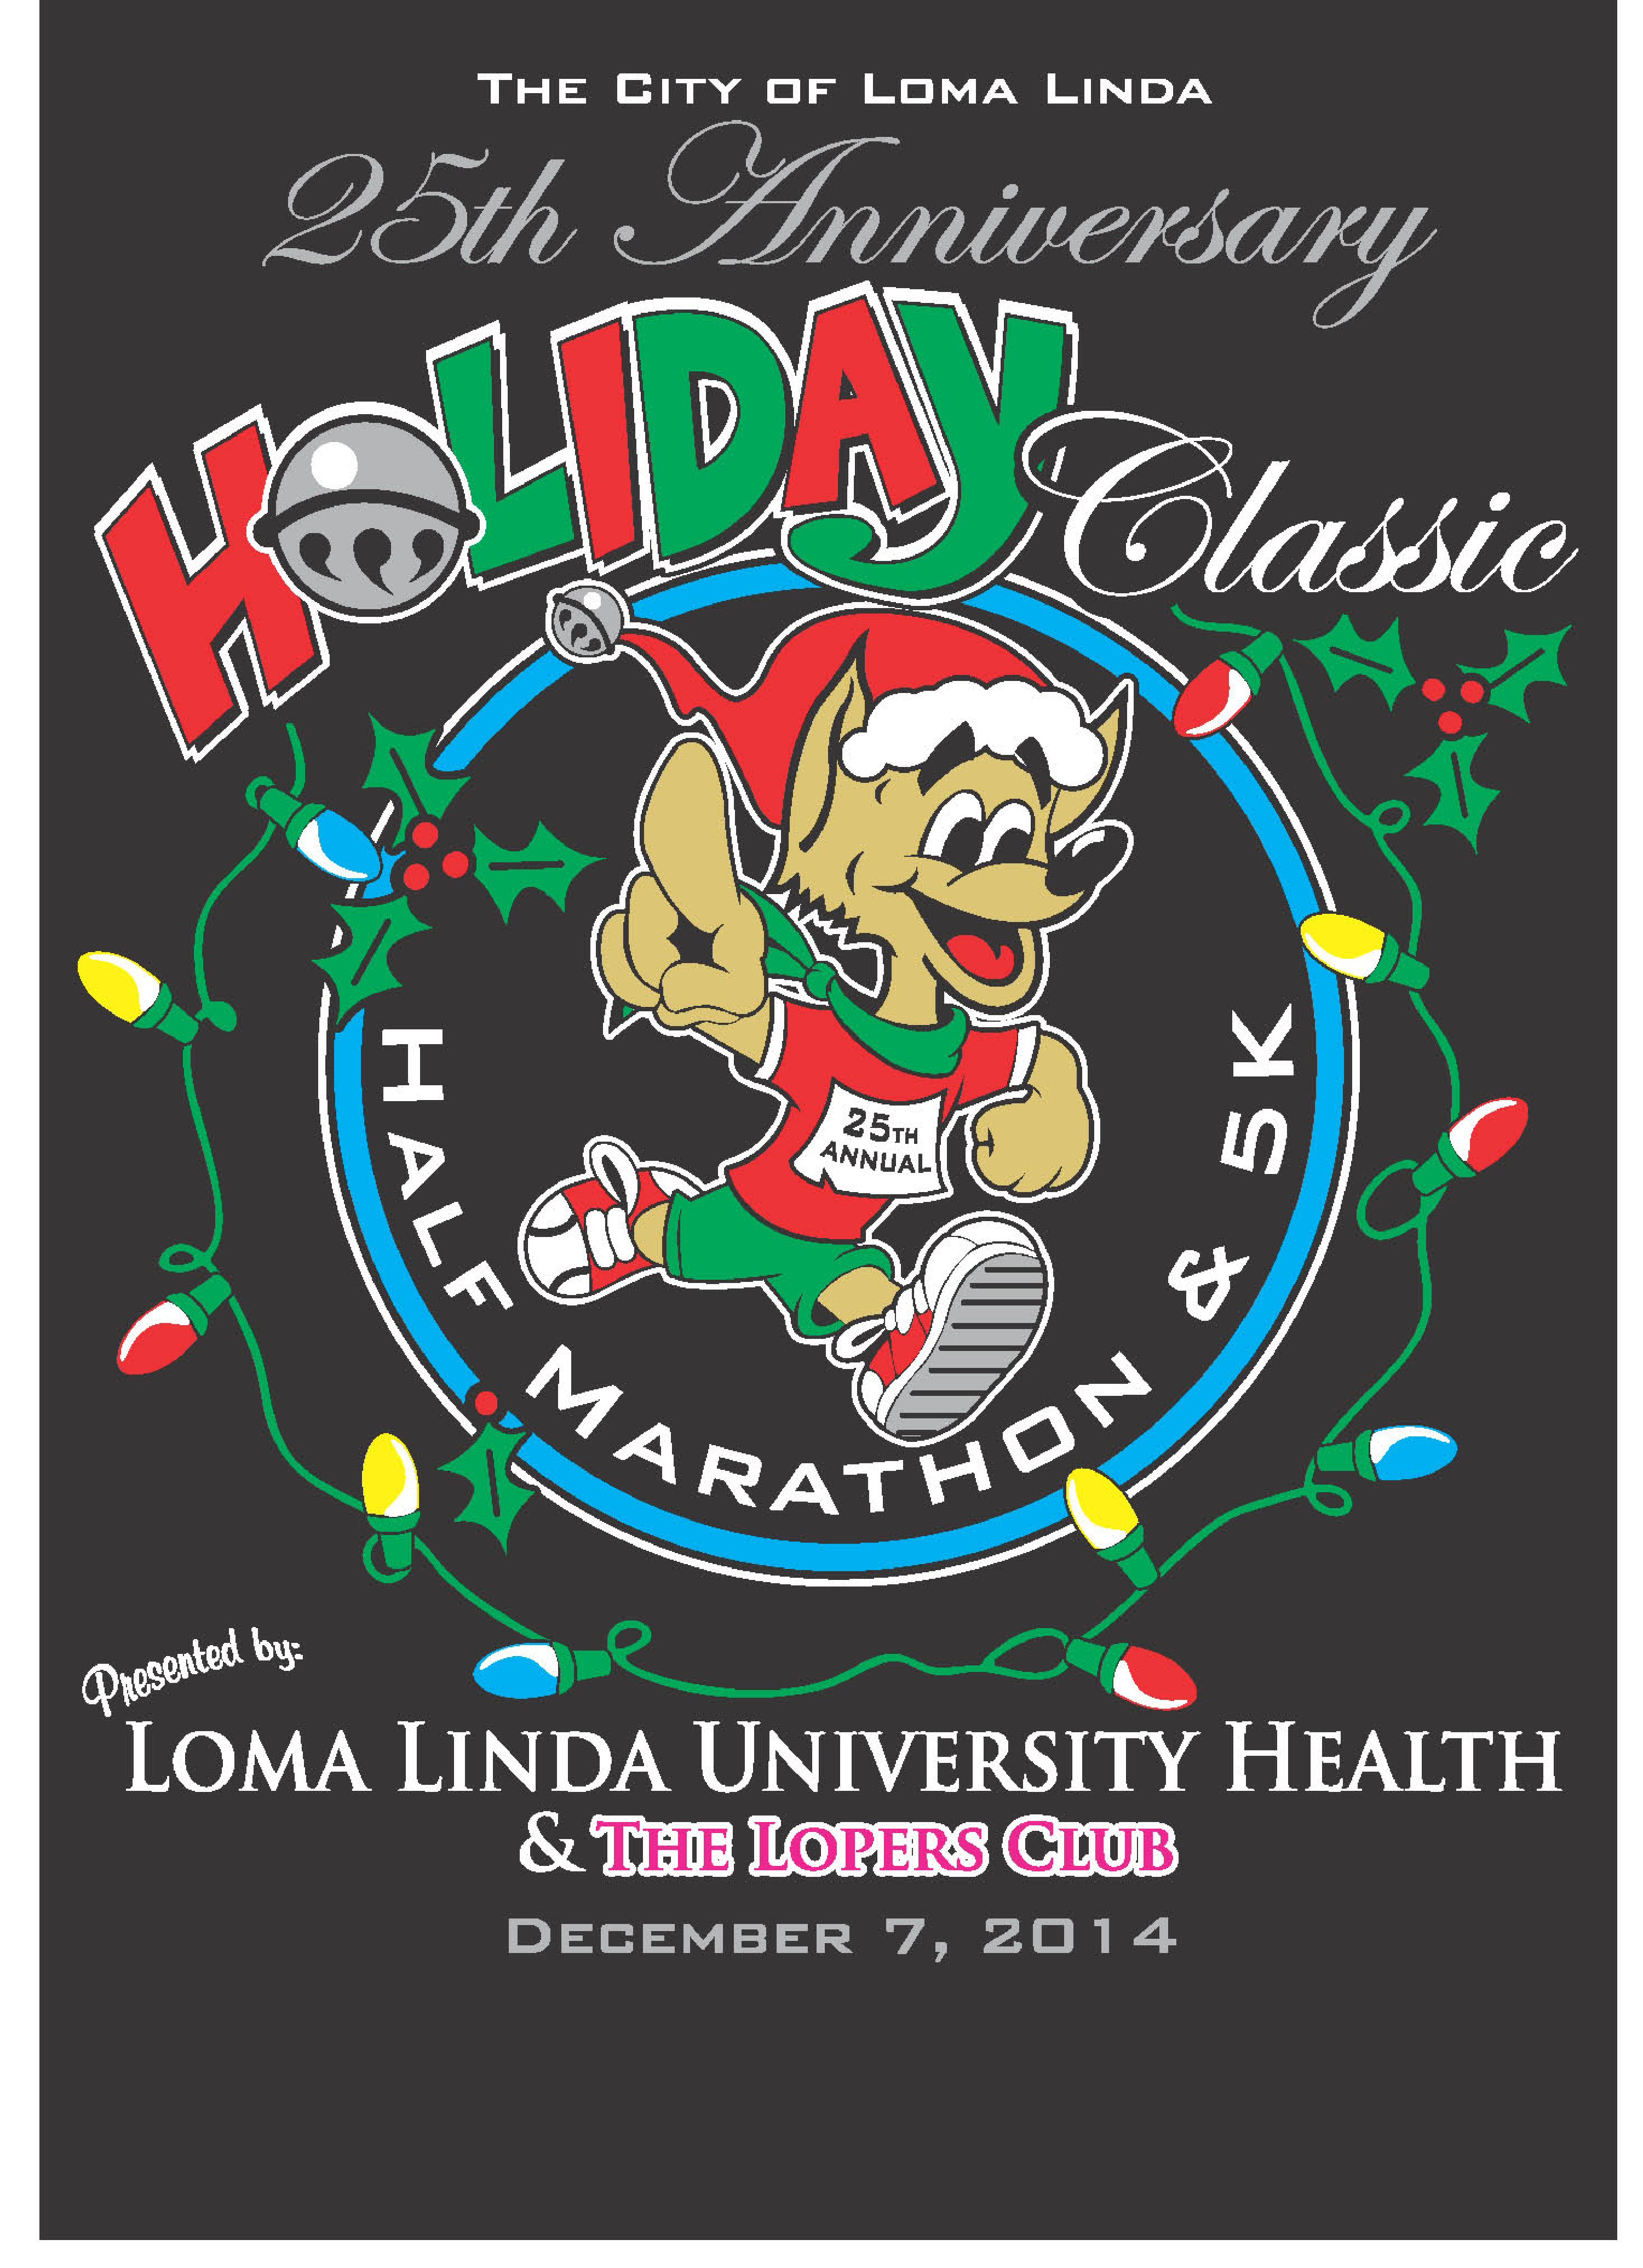 The 25th Annual Holiday Classic is Sunday 12/7/14 in Loma Linda, CA.  Early Registration (reduced fees & guaranteed commemorative shirt) ends 11/17/14 at midnight.  Registration closes 11/28/14.